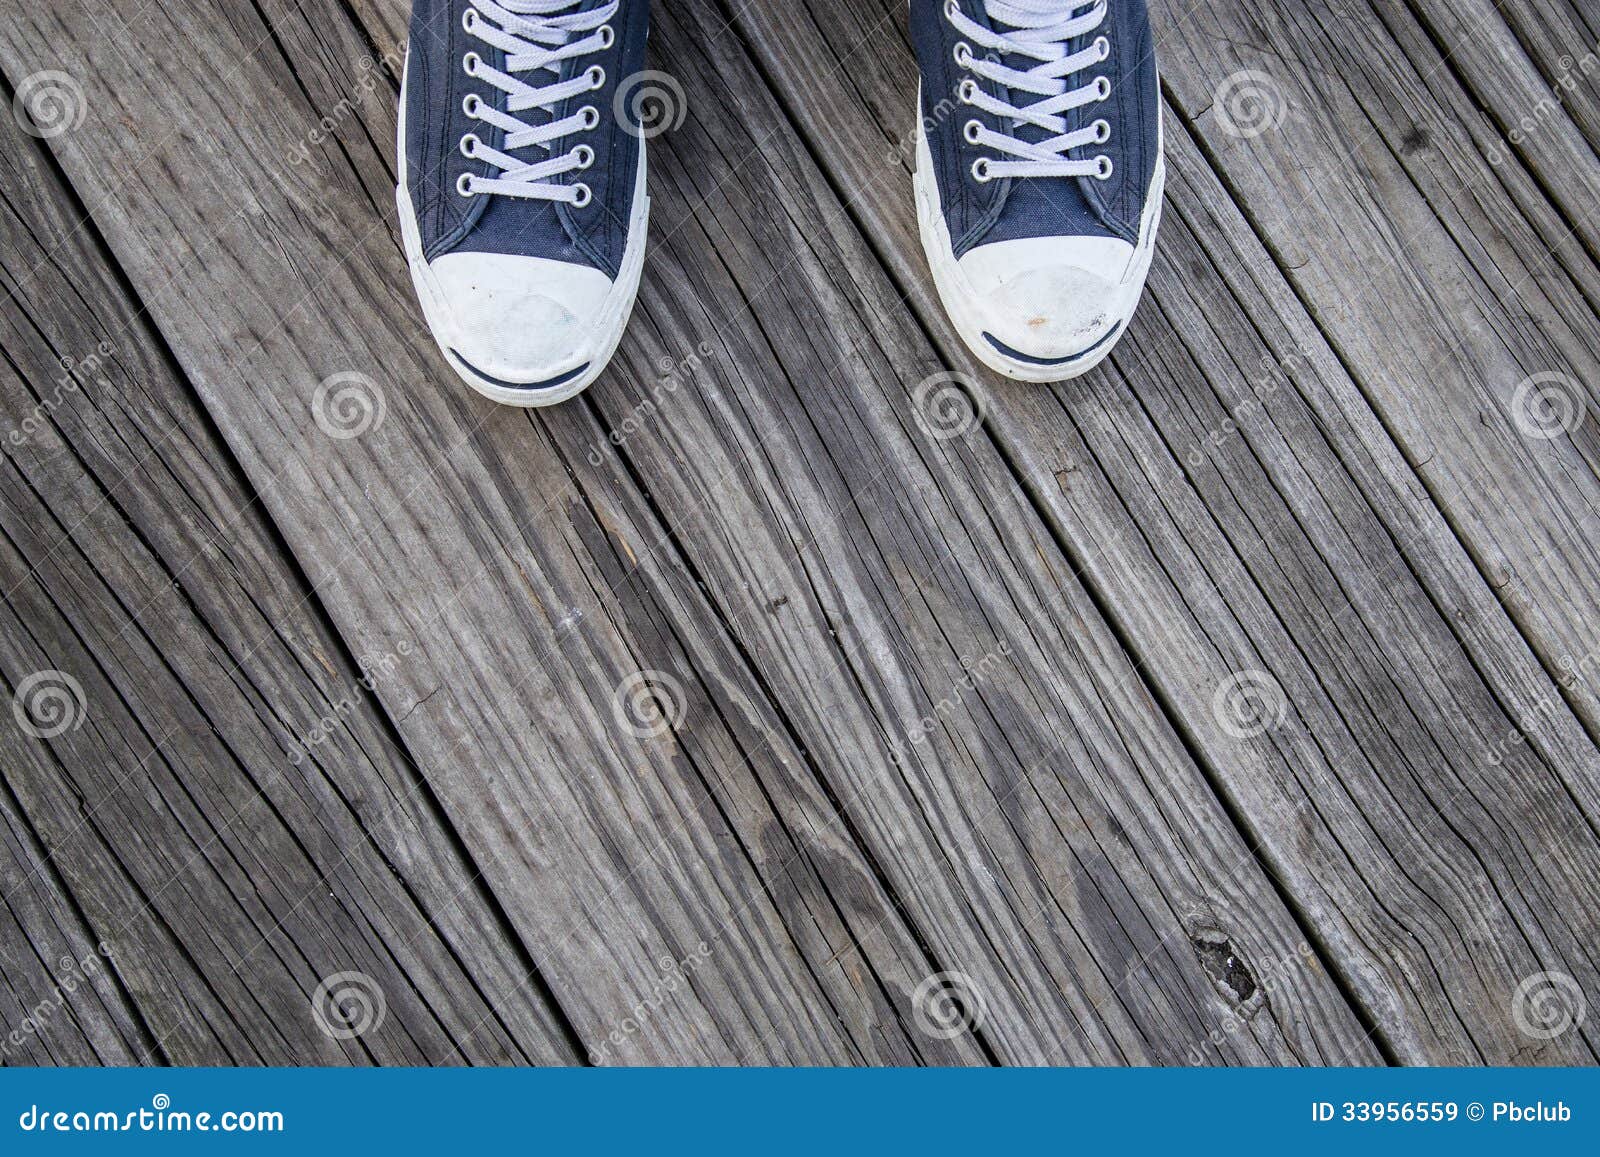 Blue Canvas Sneakers on Feet on Wood Stock Image - Image of cloth ...